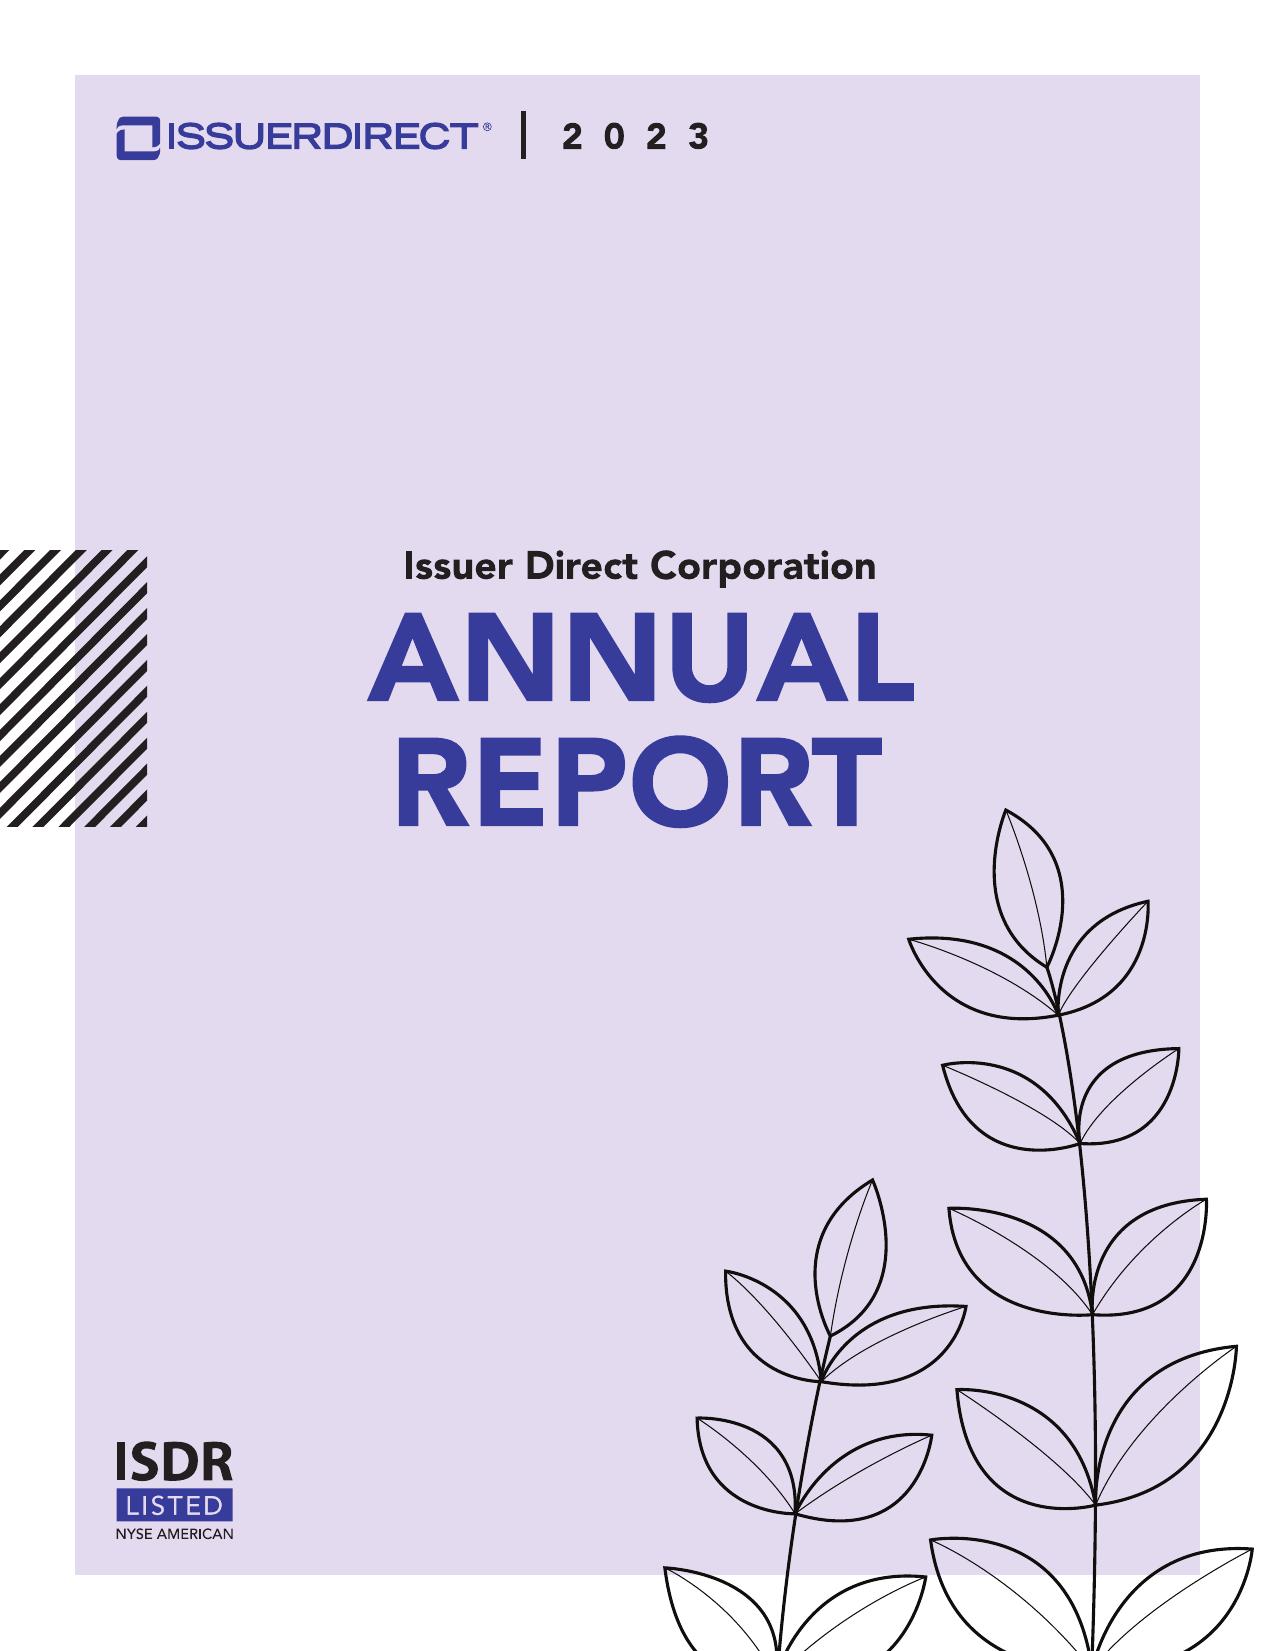 HCAHEALTHCARE Annual Report